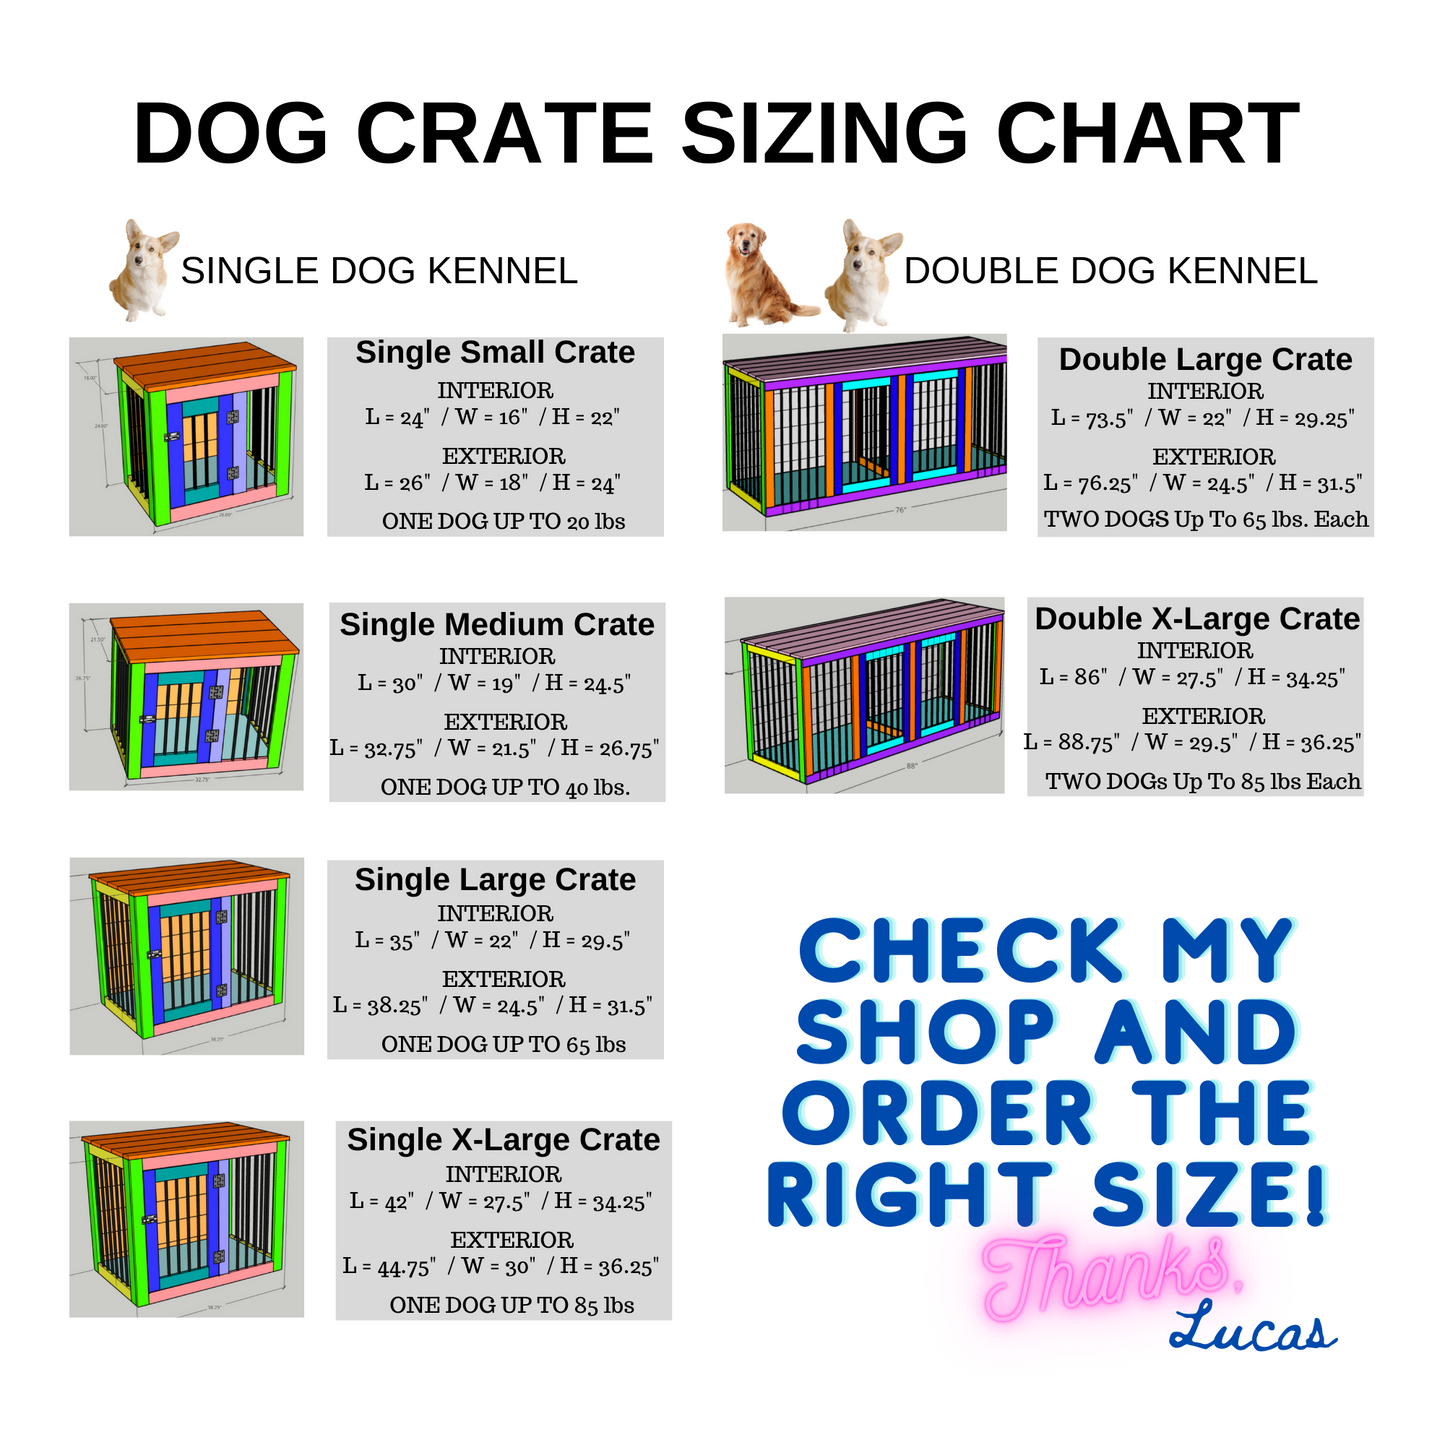 Double XL Dog Crate Plans